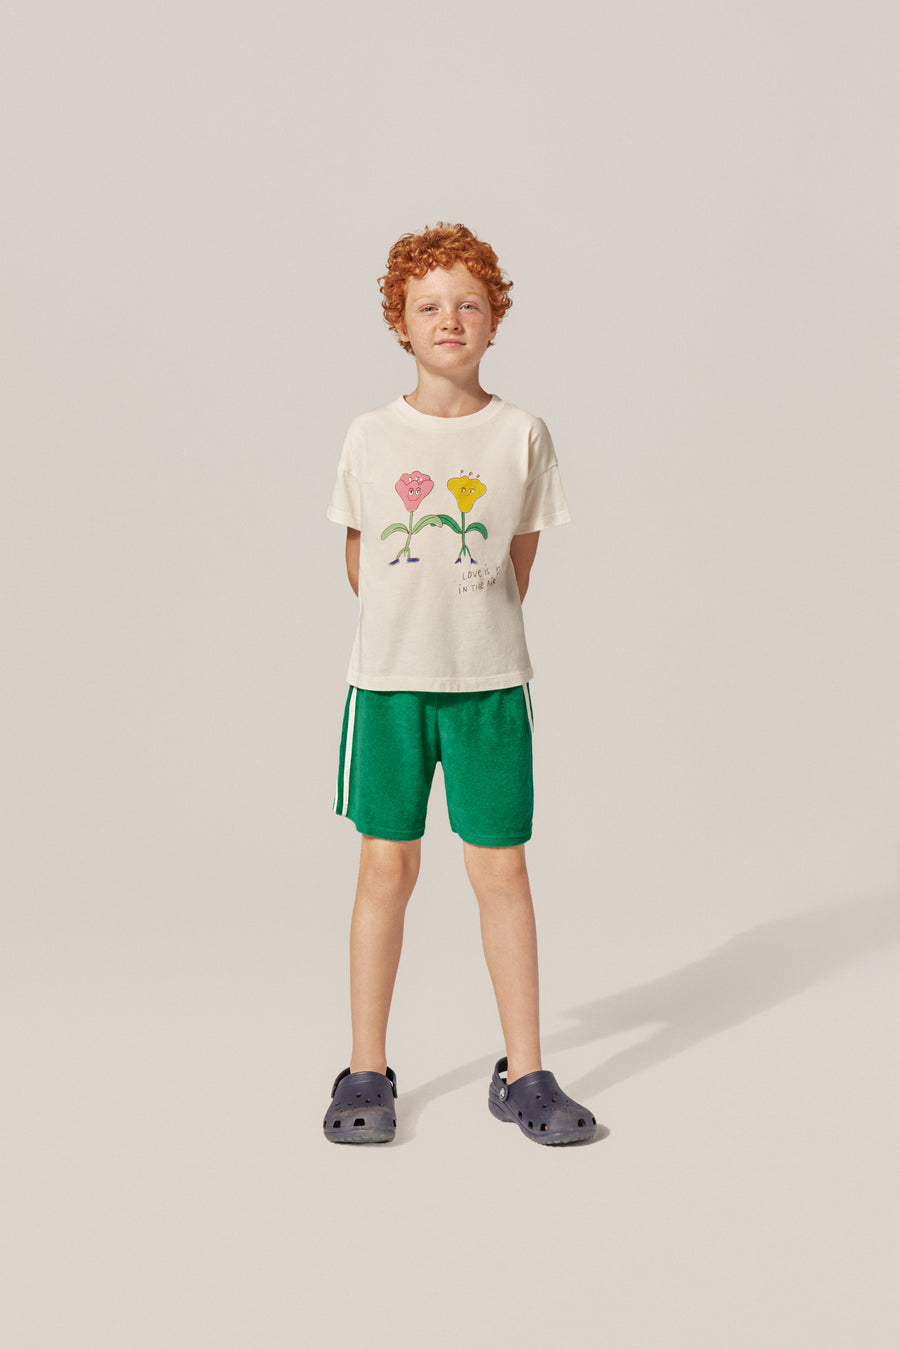 Kids T-Shirt | Love is in the Air